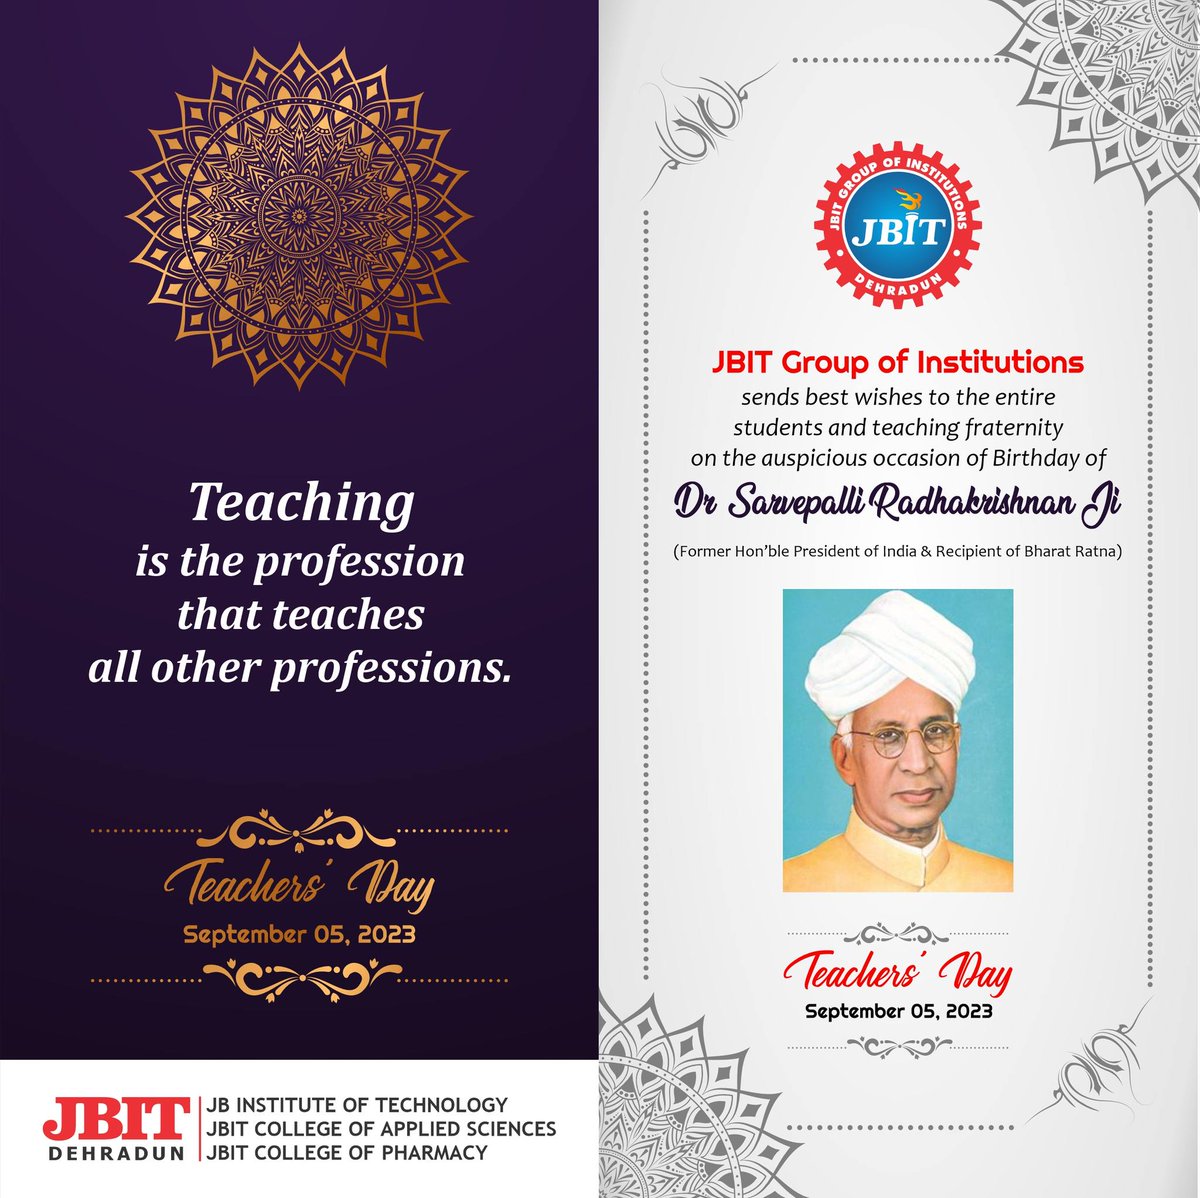 JBIT Group of Institutions sends best wishes to the entire students and teaching fraternity on the auspicious occasion the Happy Teachers' Day - September 05, 2023.
#TEACHERS'DAY #SRKRISHNAN #TEACHINGPROFESSION #NOBLEPROFFESSION